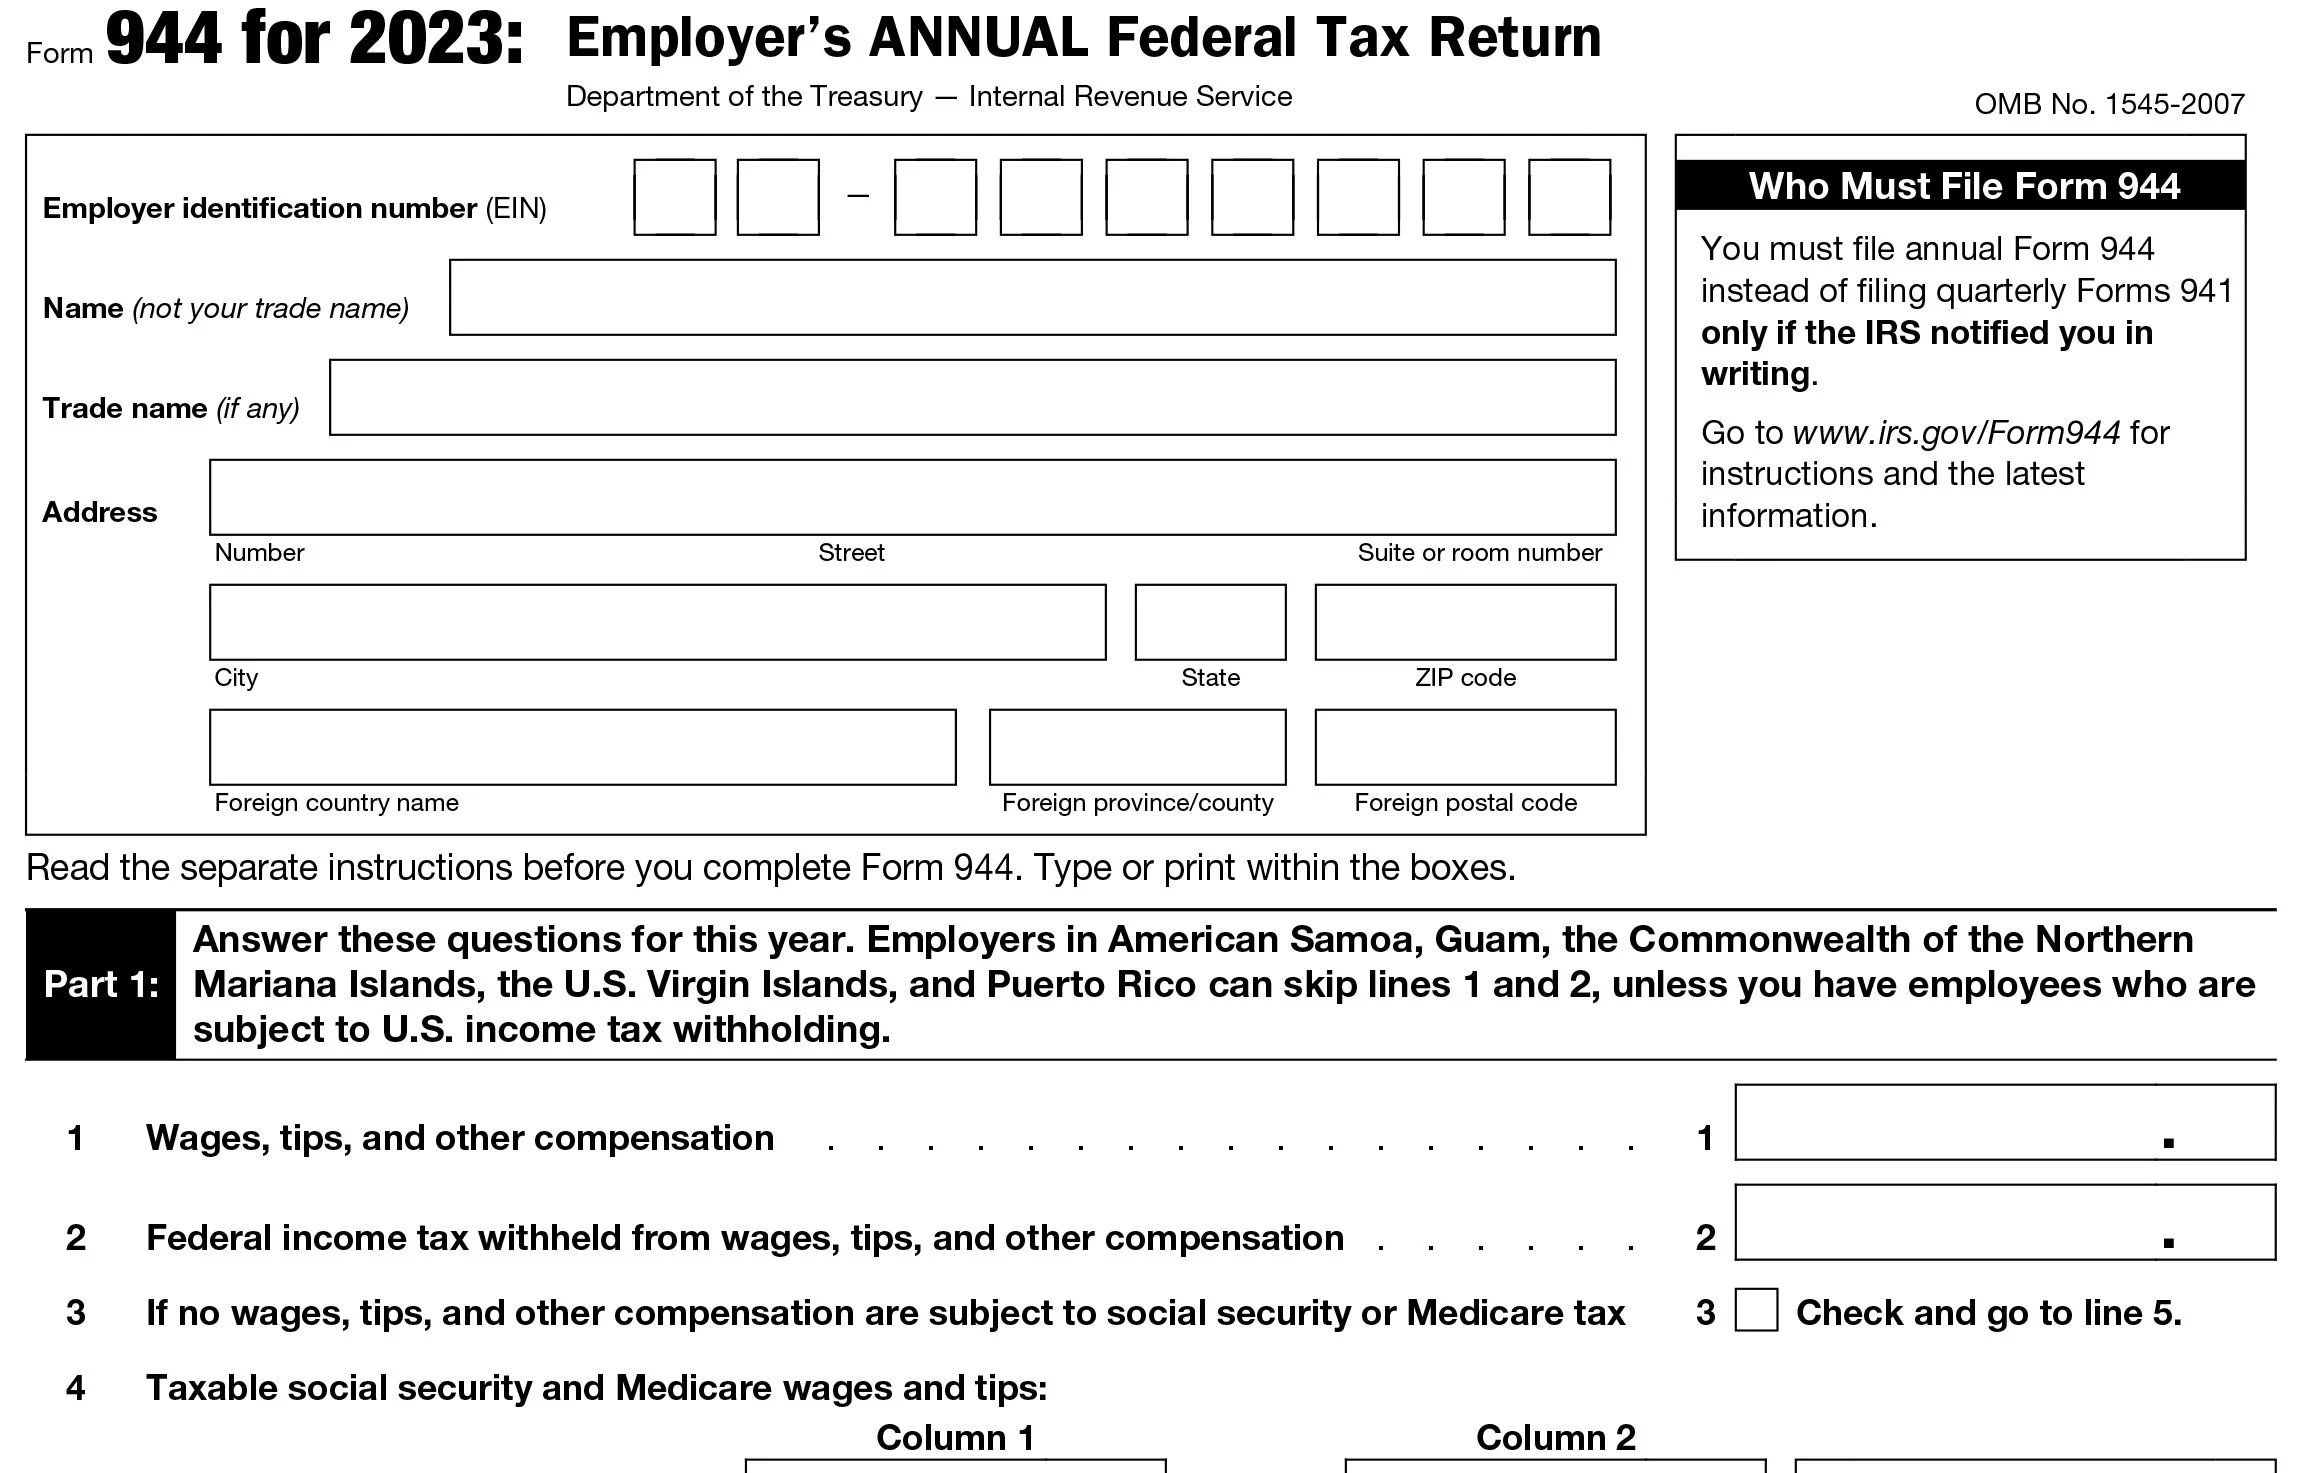 IRS Form 944 for 2023